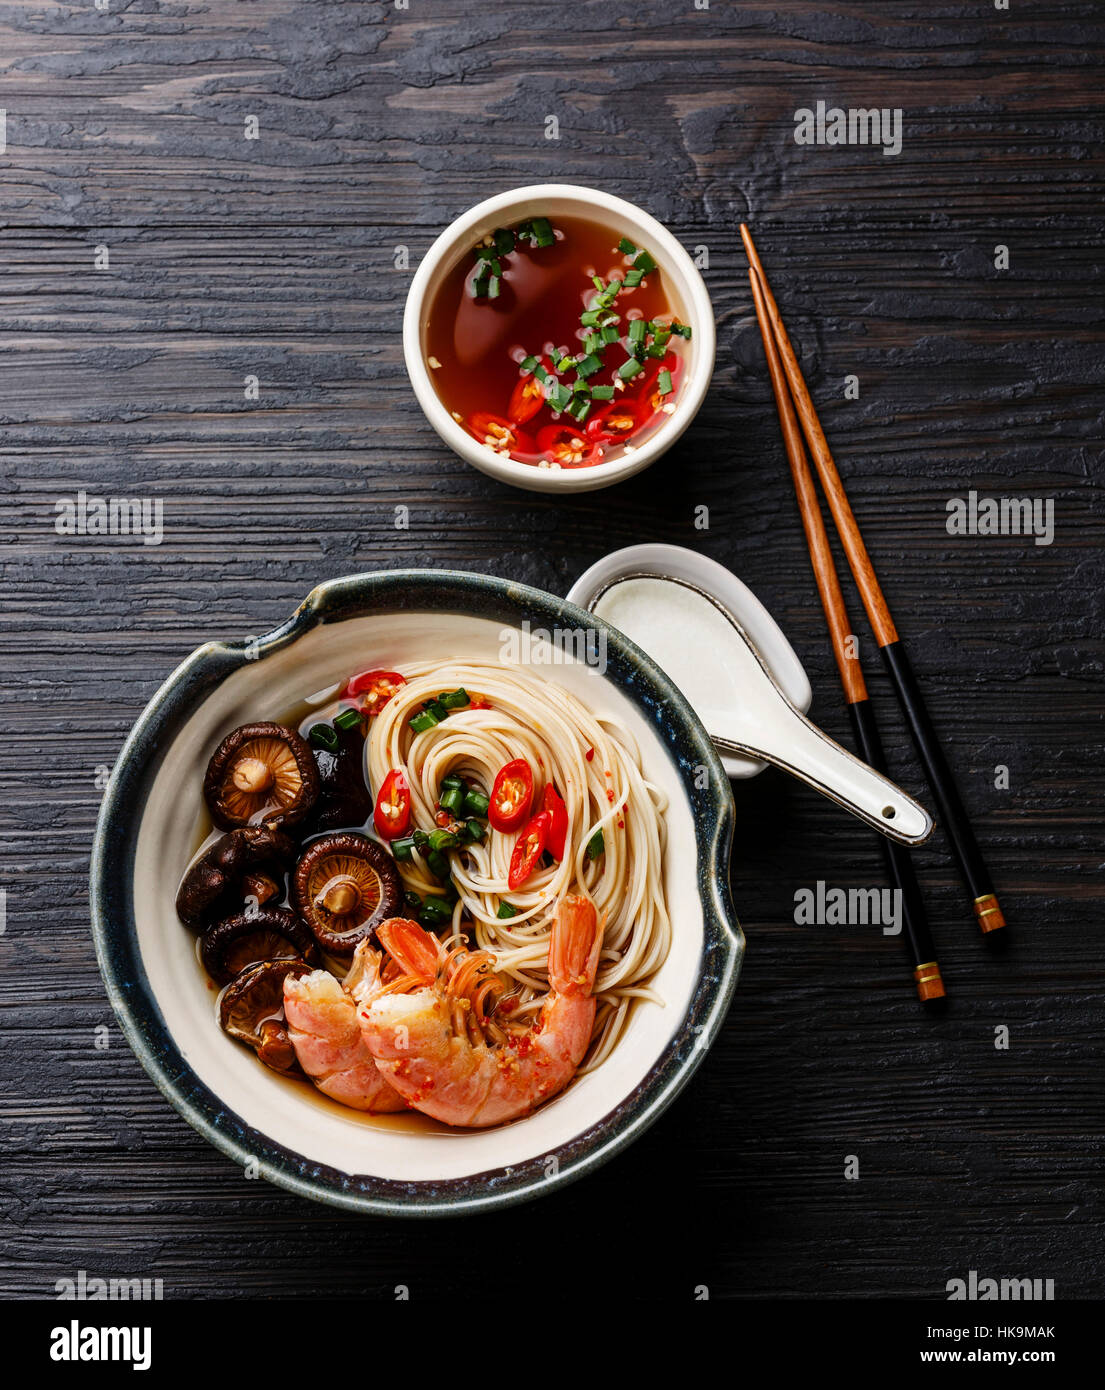 Ramen noodles with prawns and shiitake mushrooms with broth on dark wooden background Stock Photo